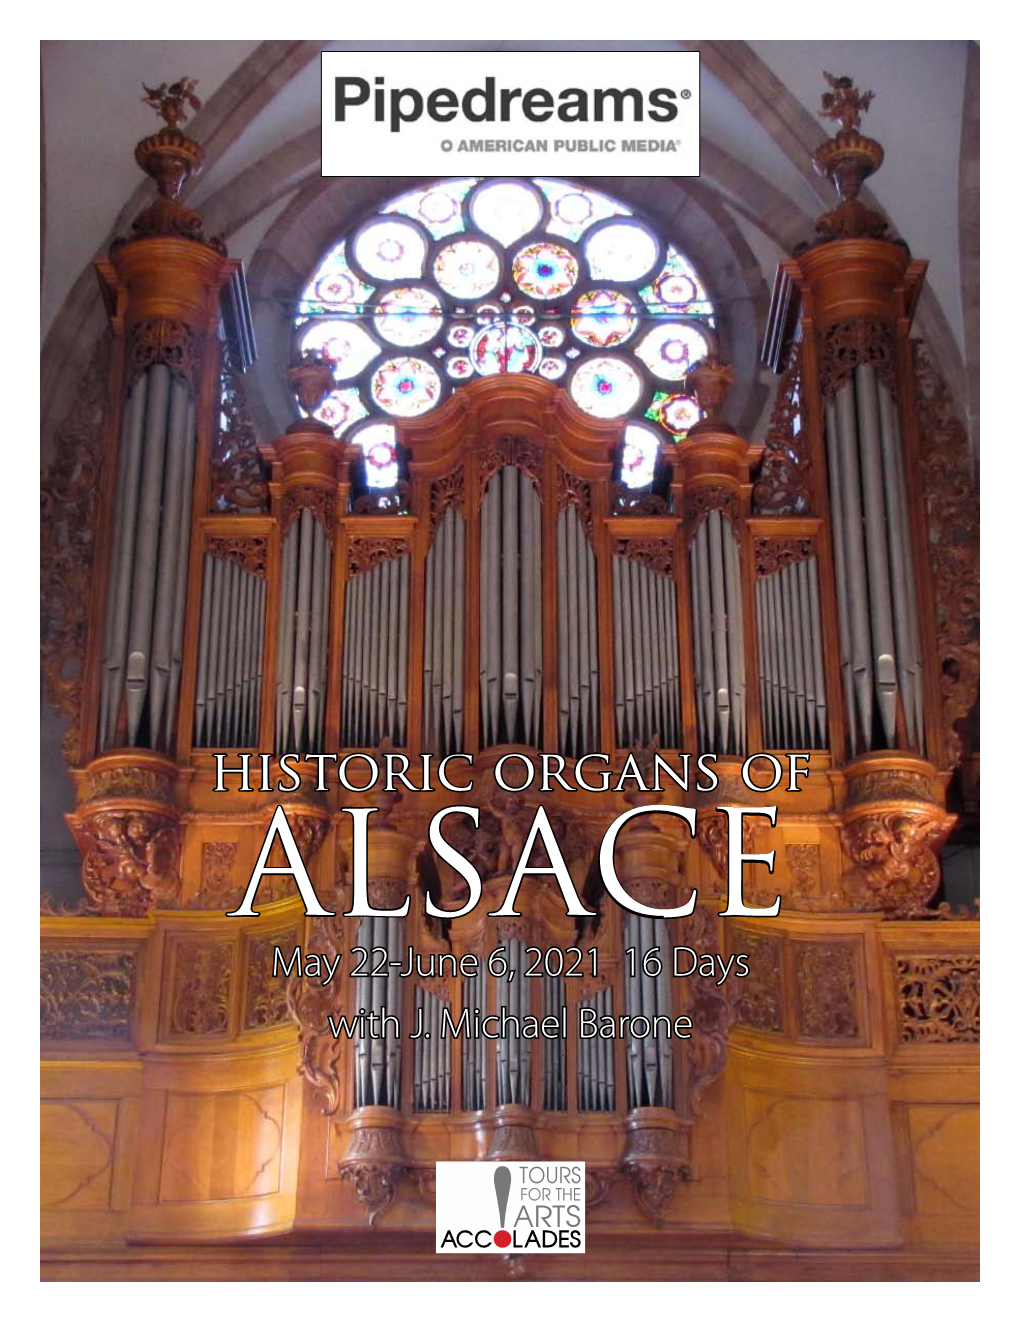 Historic Organs of ALSACE May 22-June 6, 2021 16 Days with J